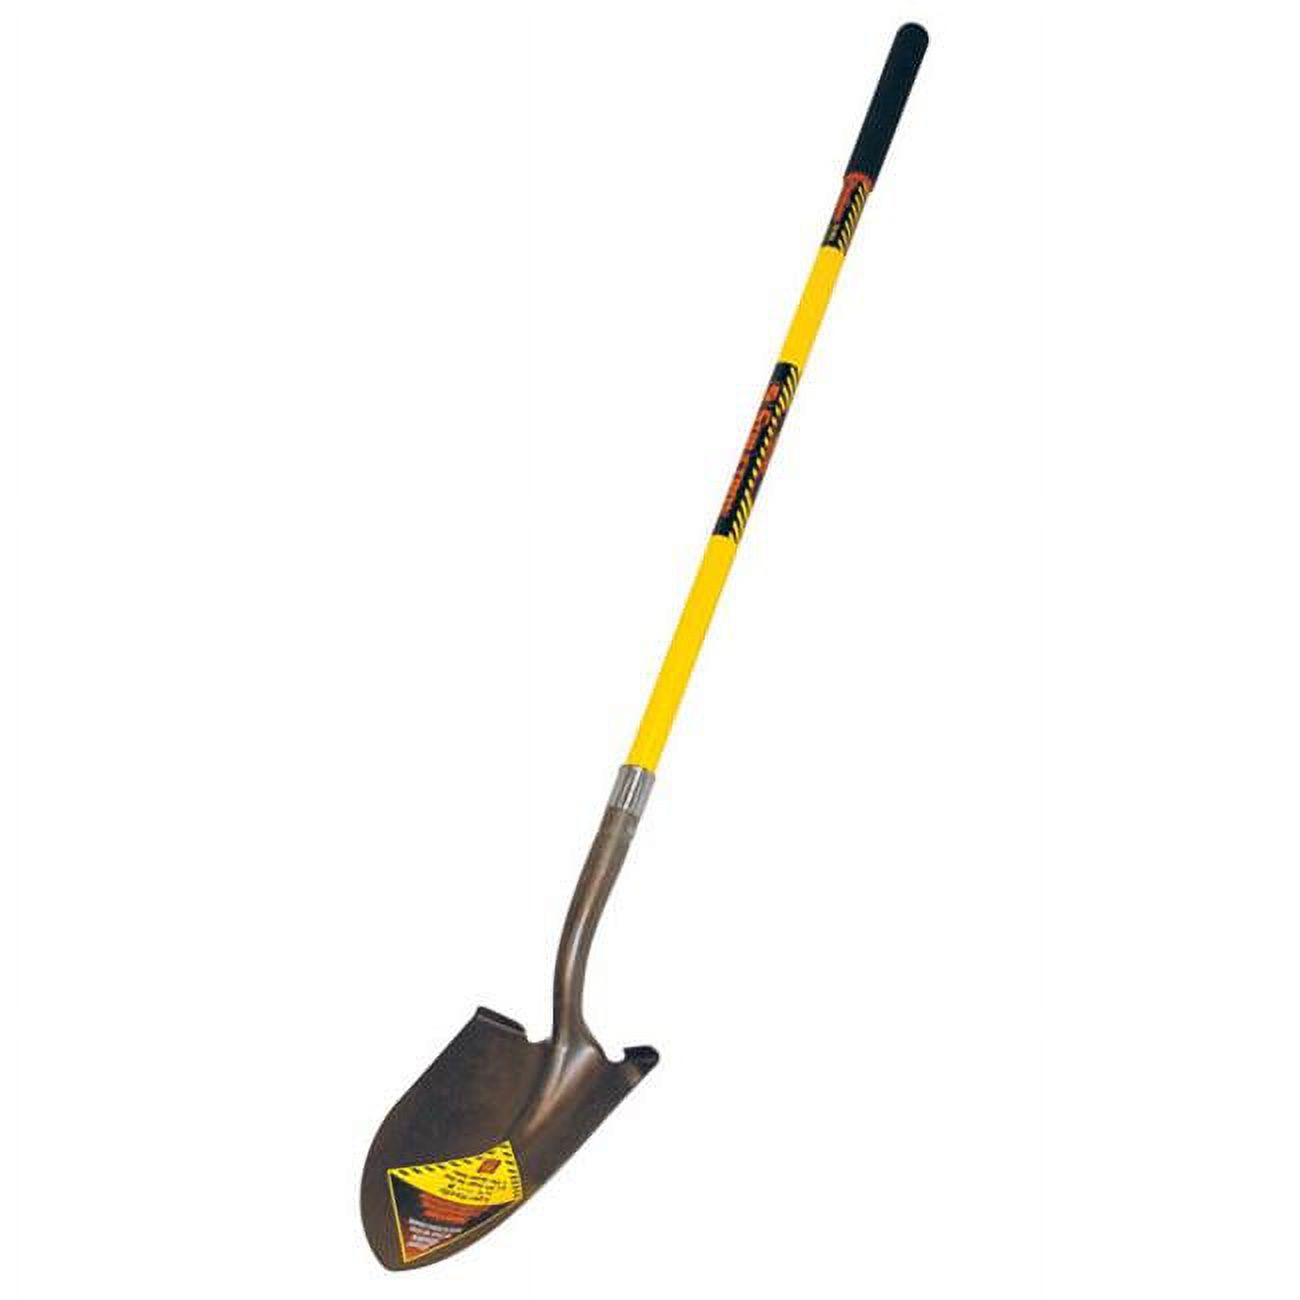 Structron S600 Power Series 49560 Shovel, 11-1/2 in L x 9-1/2 in W Blade, Fiberglass Handle - image 1 of 1